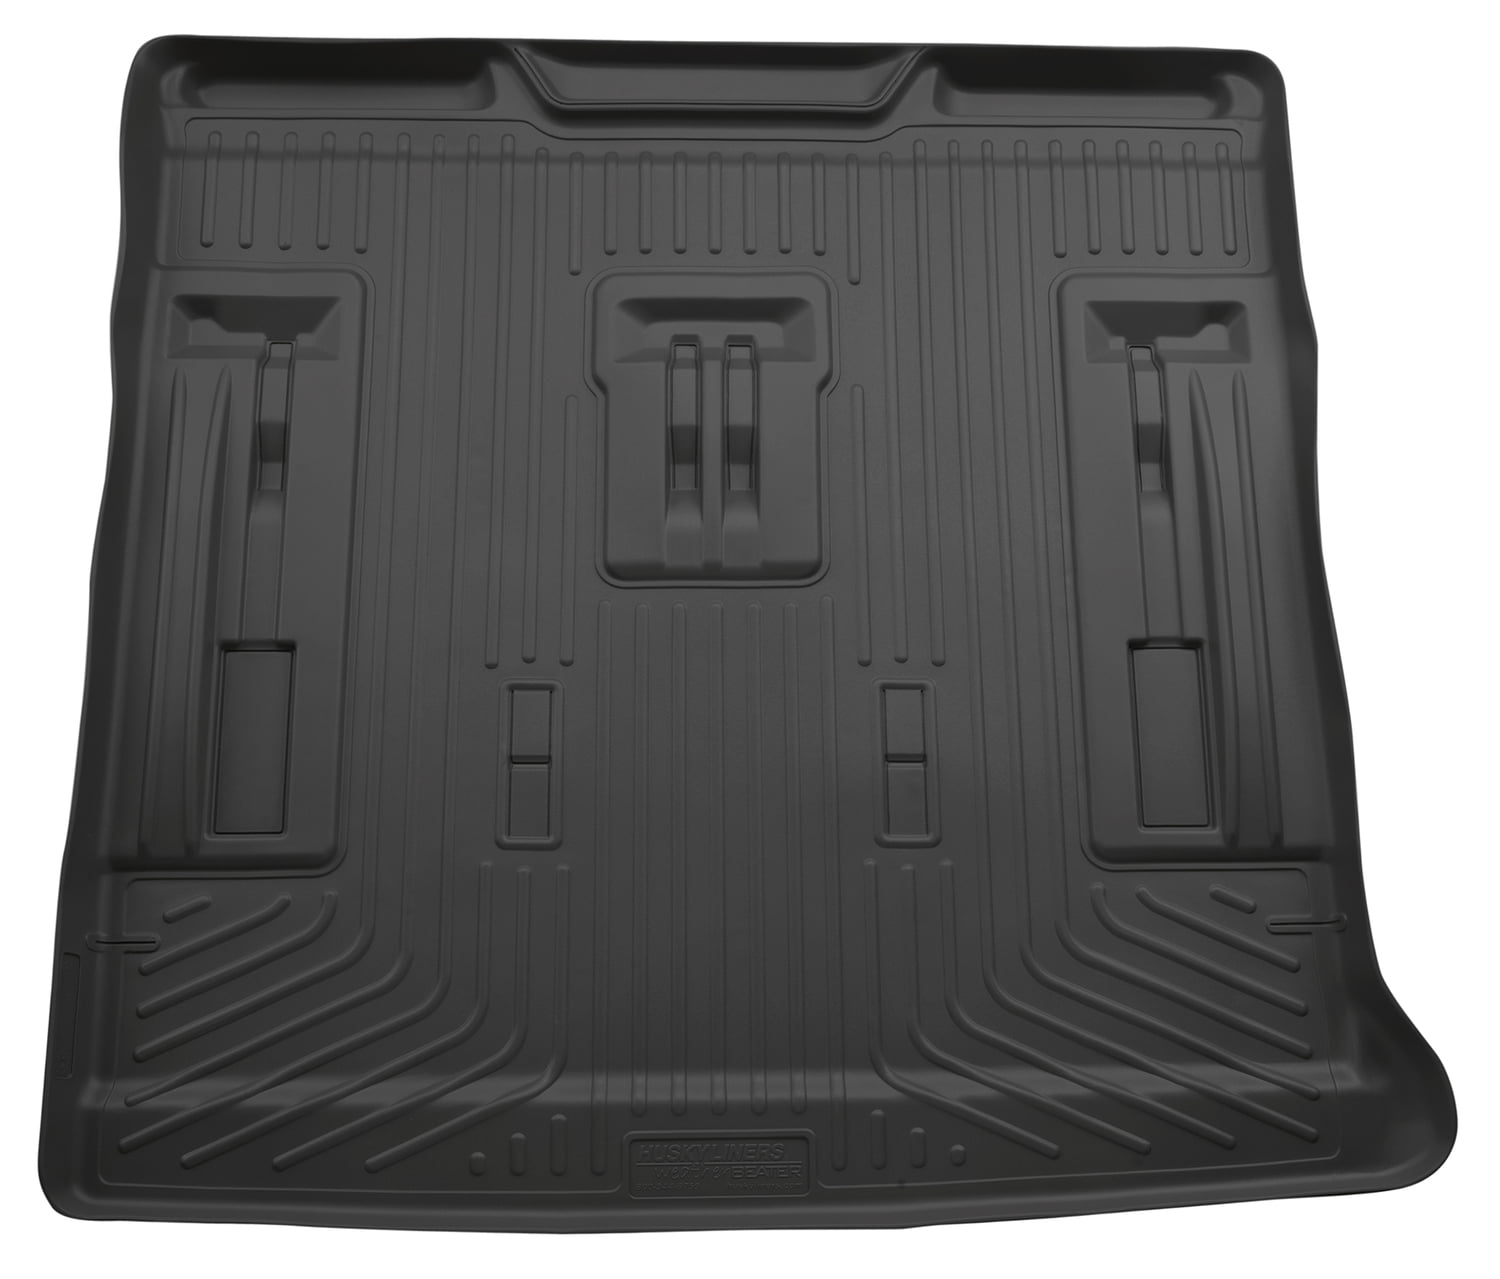 Husky Liners Front & 2nd Seat Floor Liners Fits 07-14 Suburban 1500/Yukon XL1500 